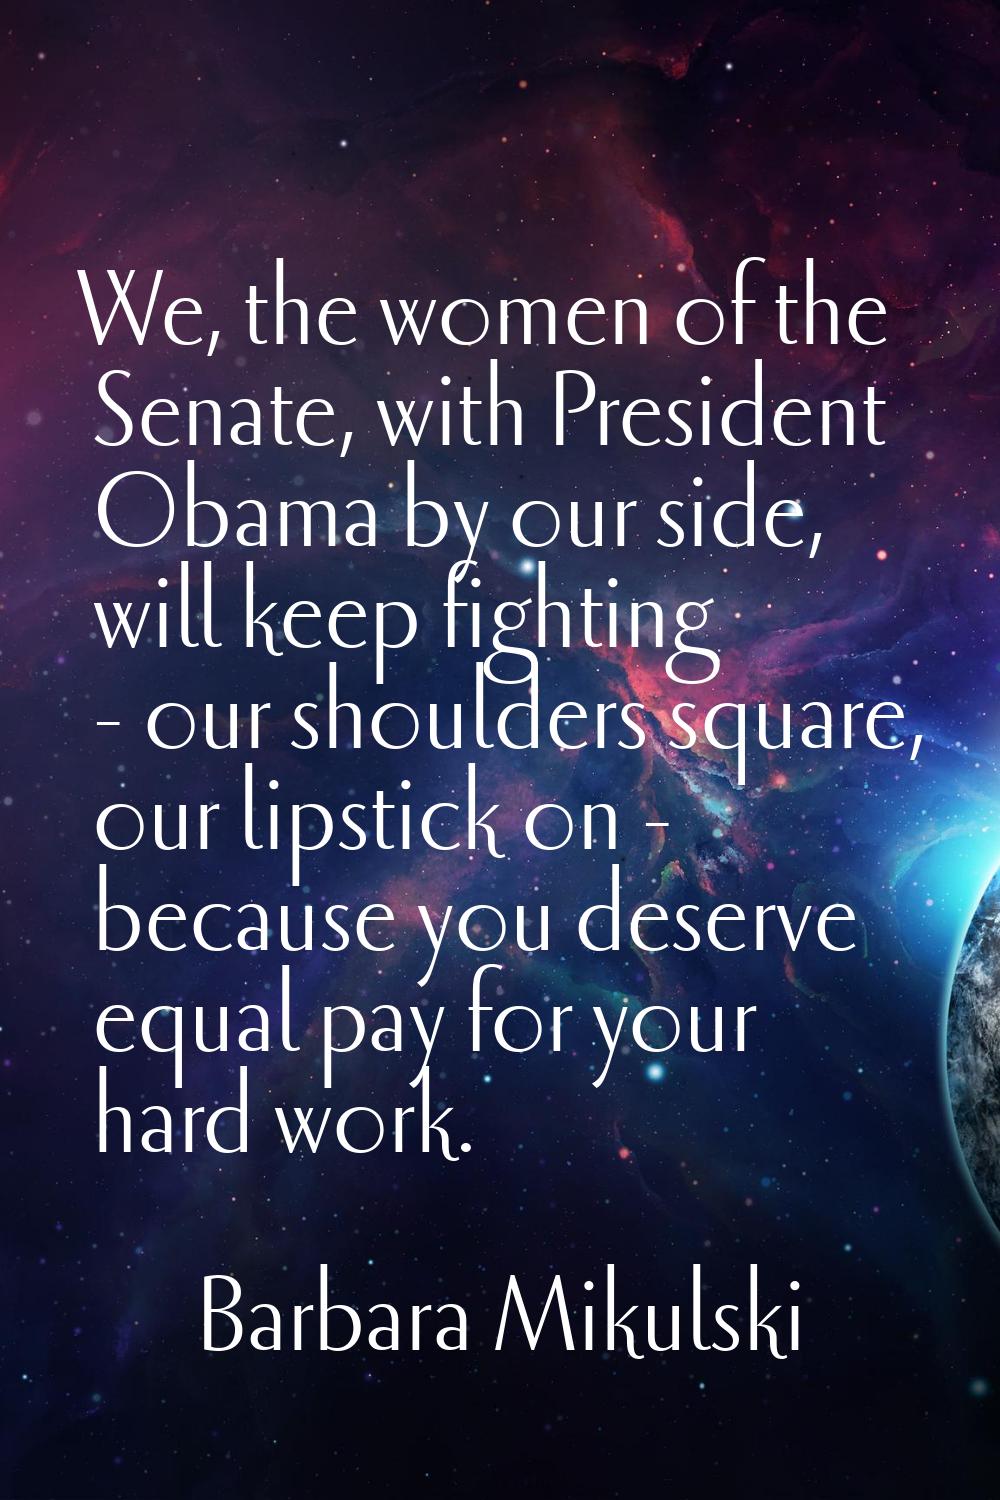 We, the women of the Senate, with President Obama by our side, will keep fighting - our shoulders s